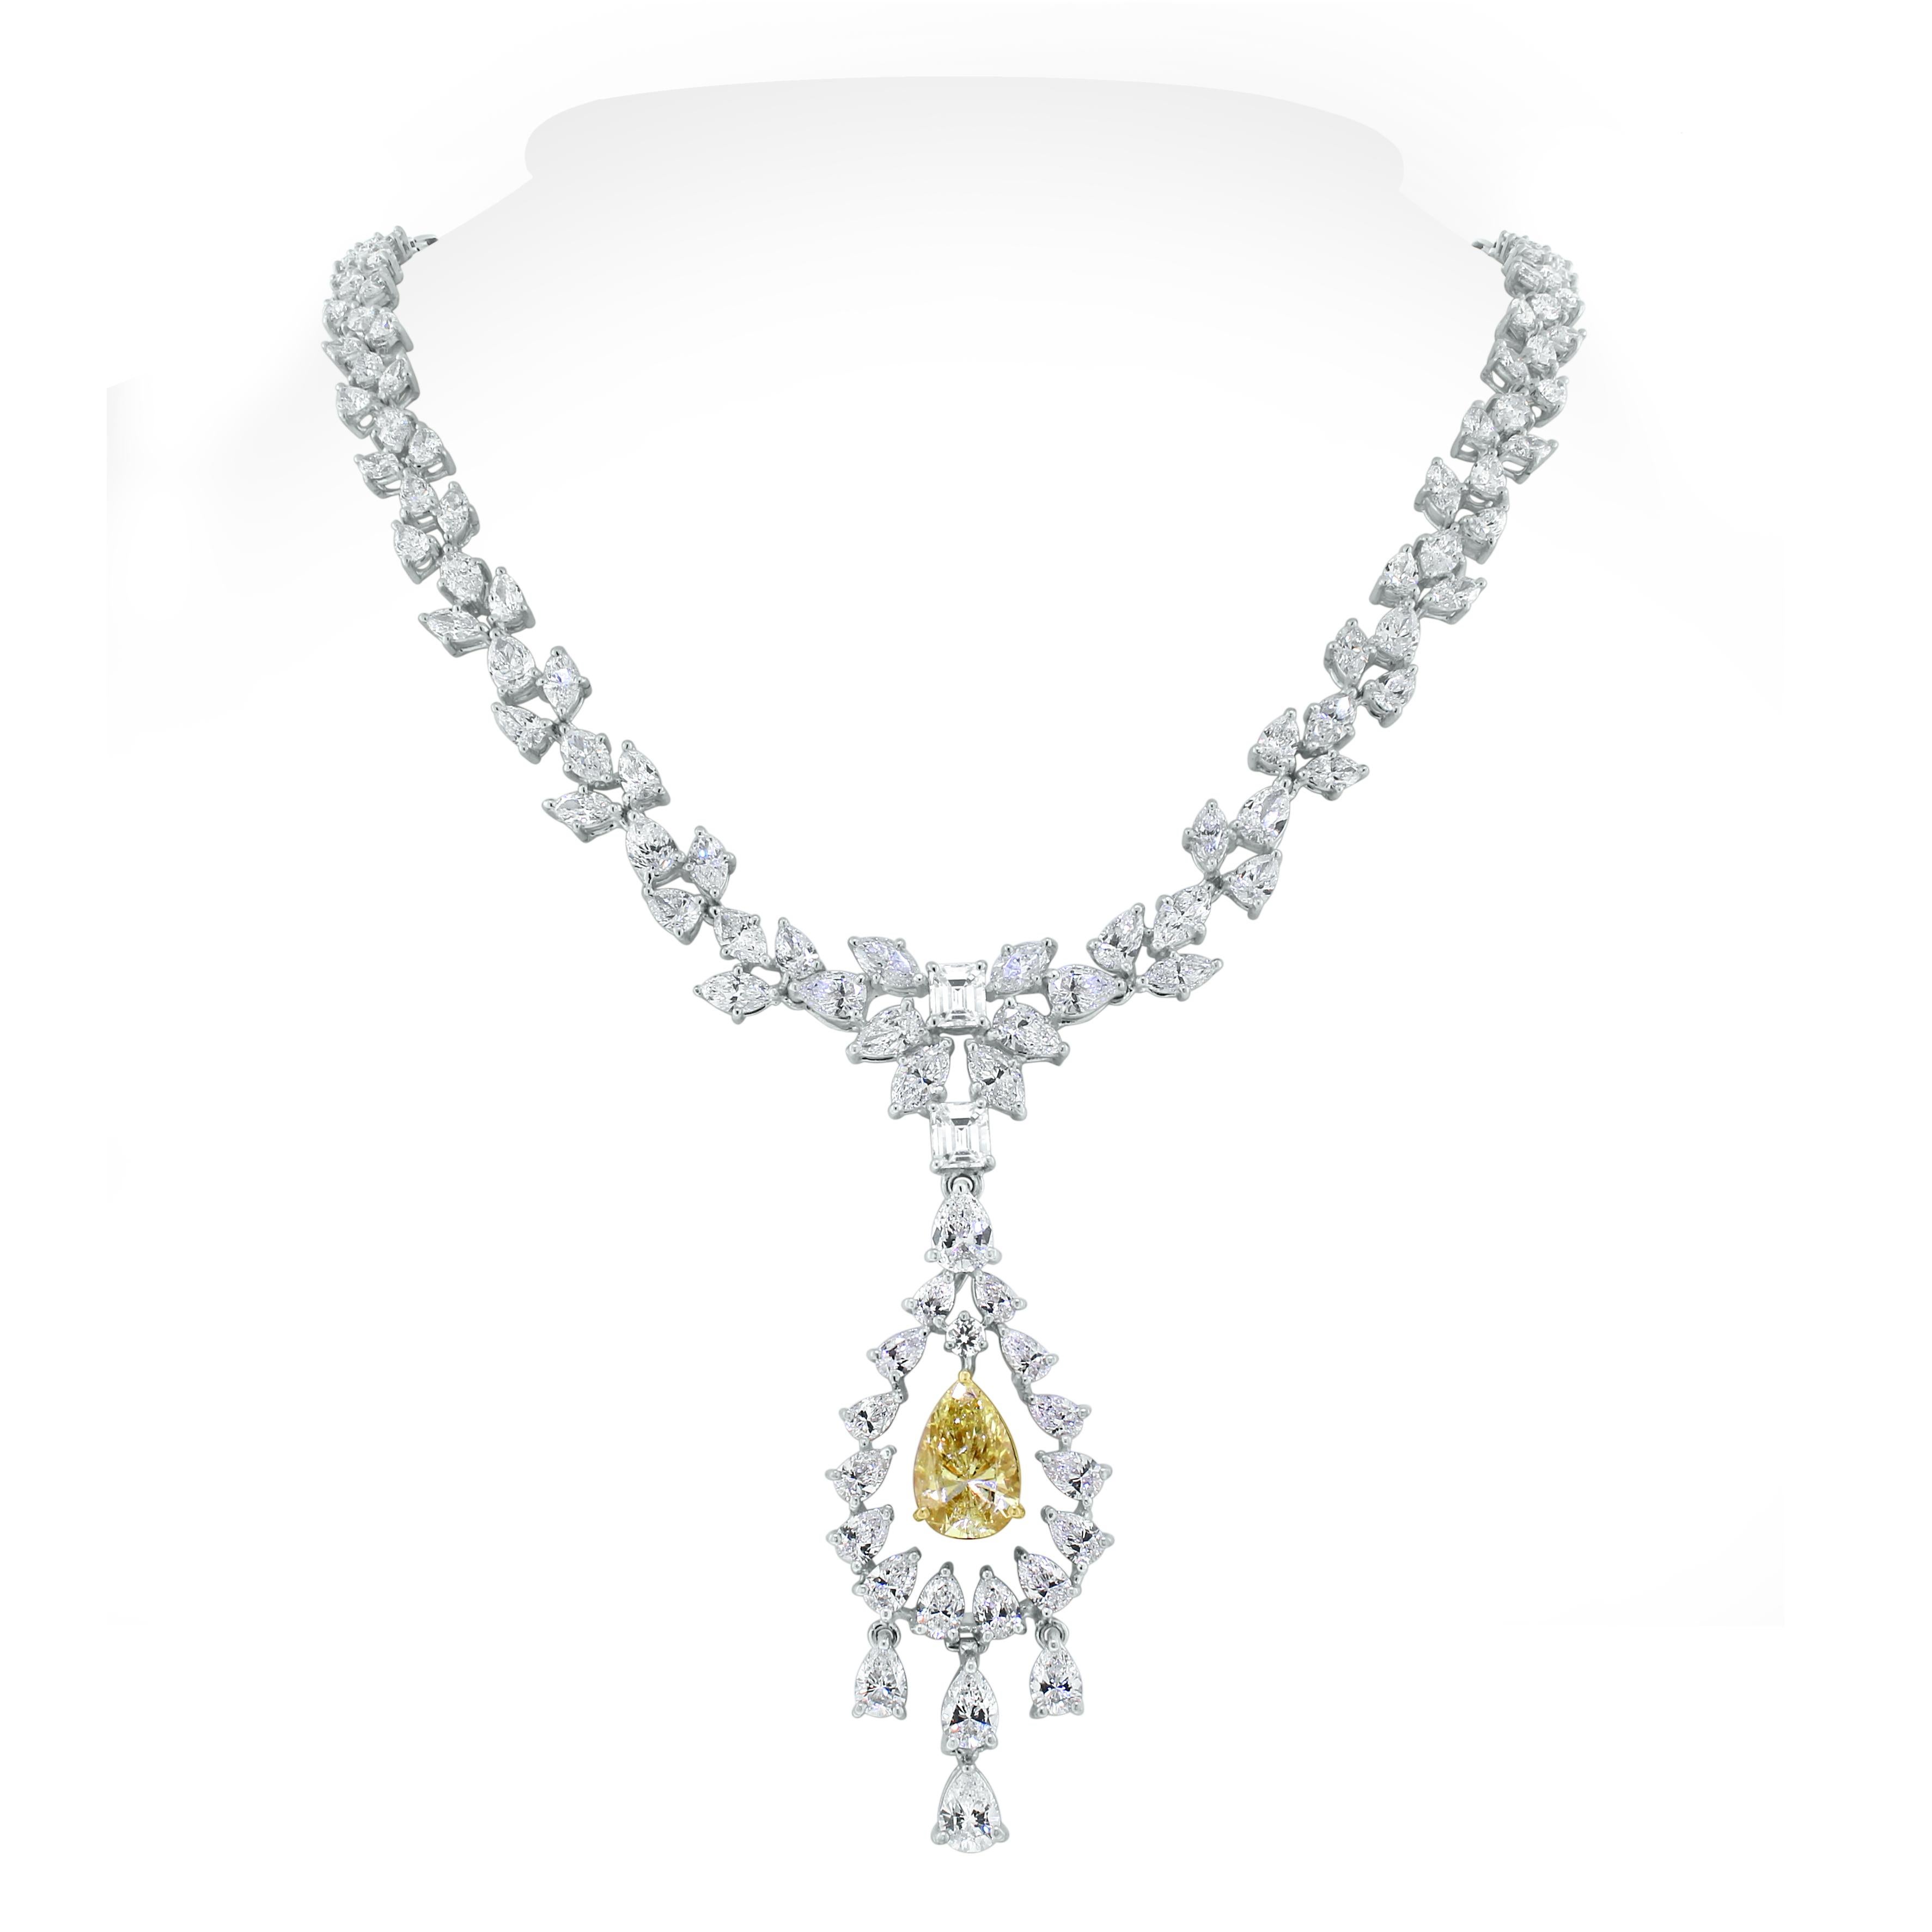 With a yellow pear shape diamond at its center, the Amaya necklace is all about delicacy and oomph. The marquise and pear diamonds weaving around the neck are elegant and sensual. This stunning piece can be worn with or without the pendant to add to